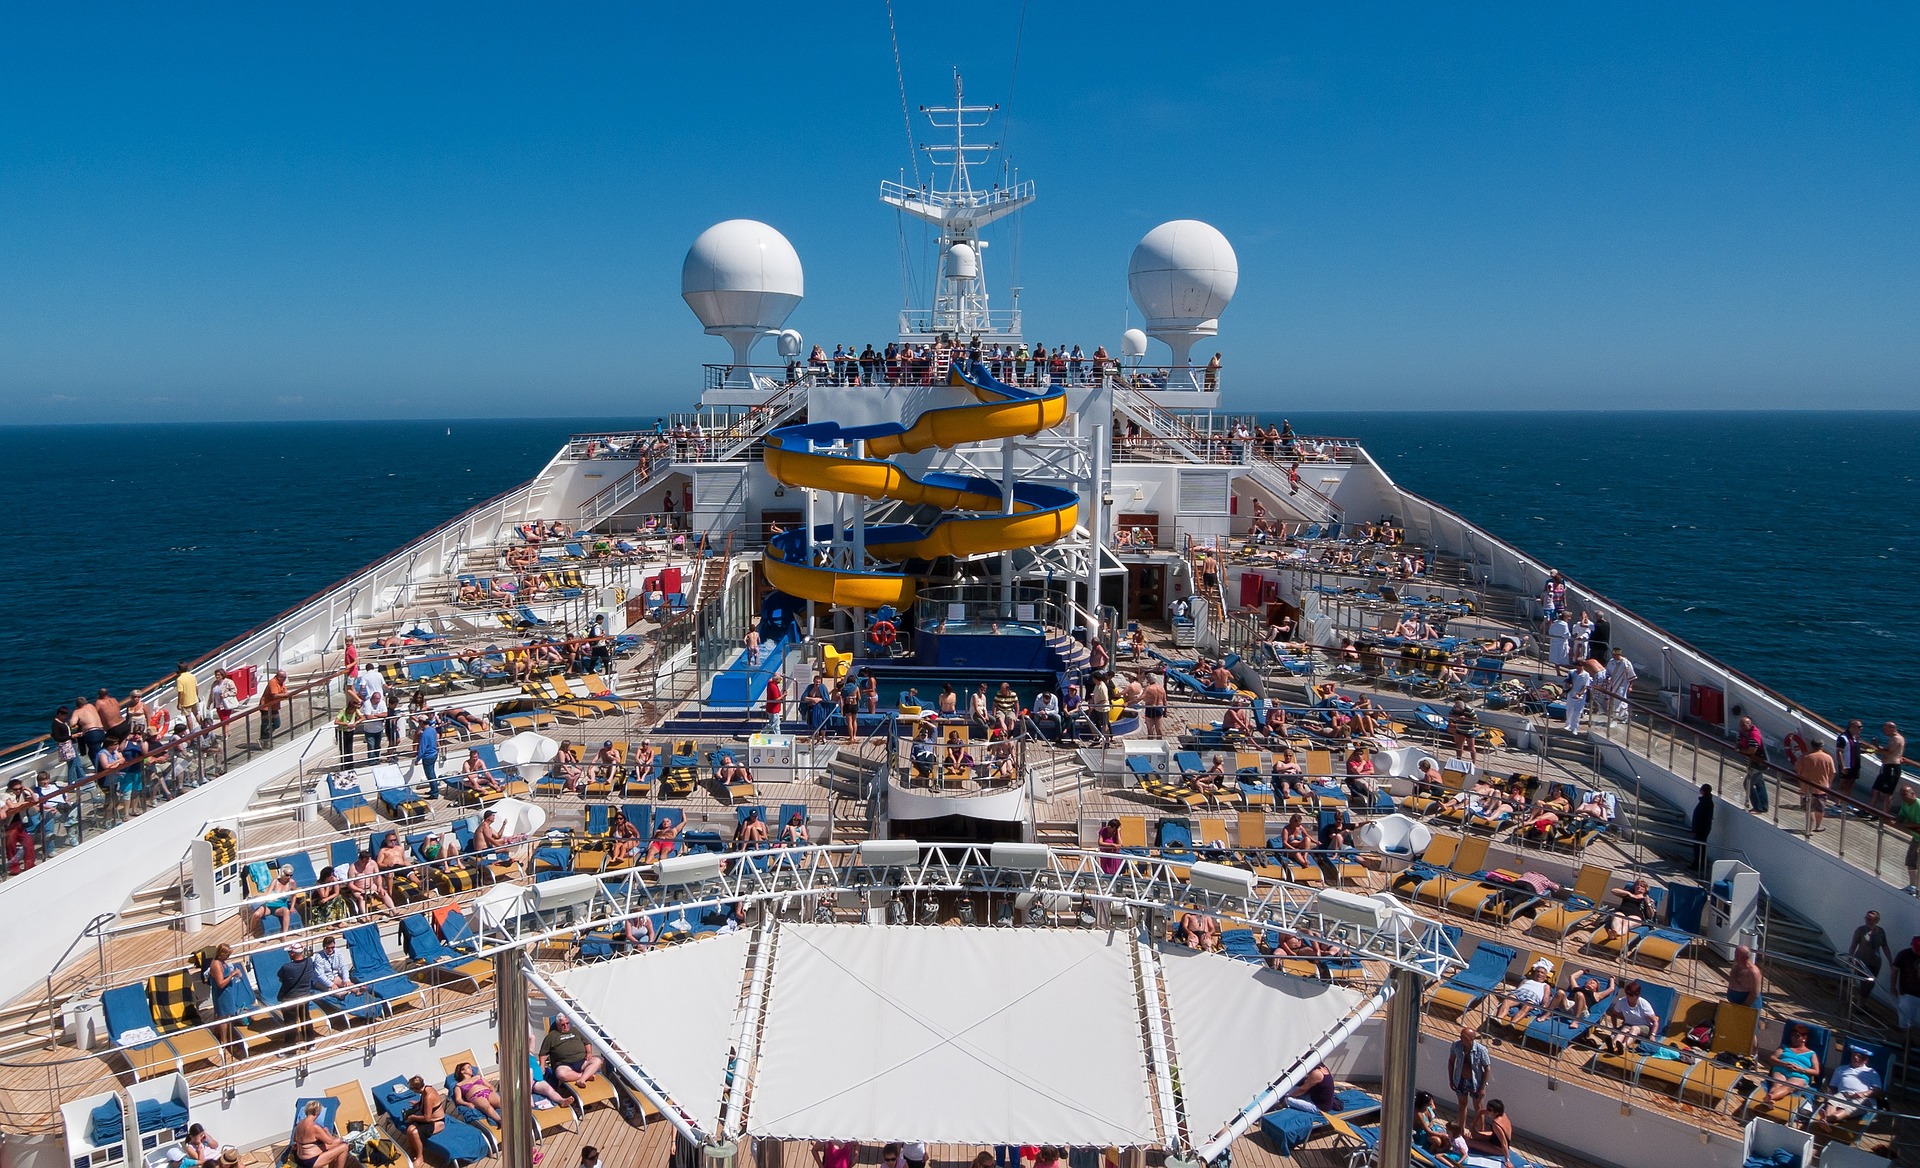 Do Cruises Come With Increased Risk of Outbreaks?